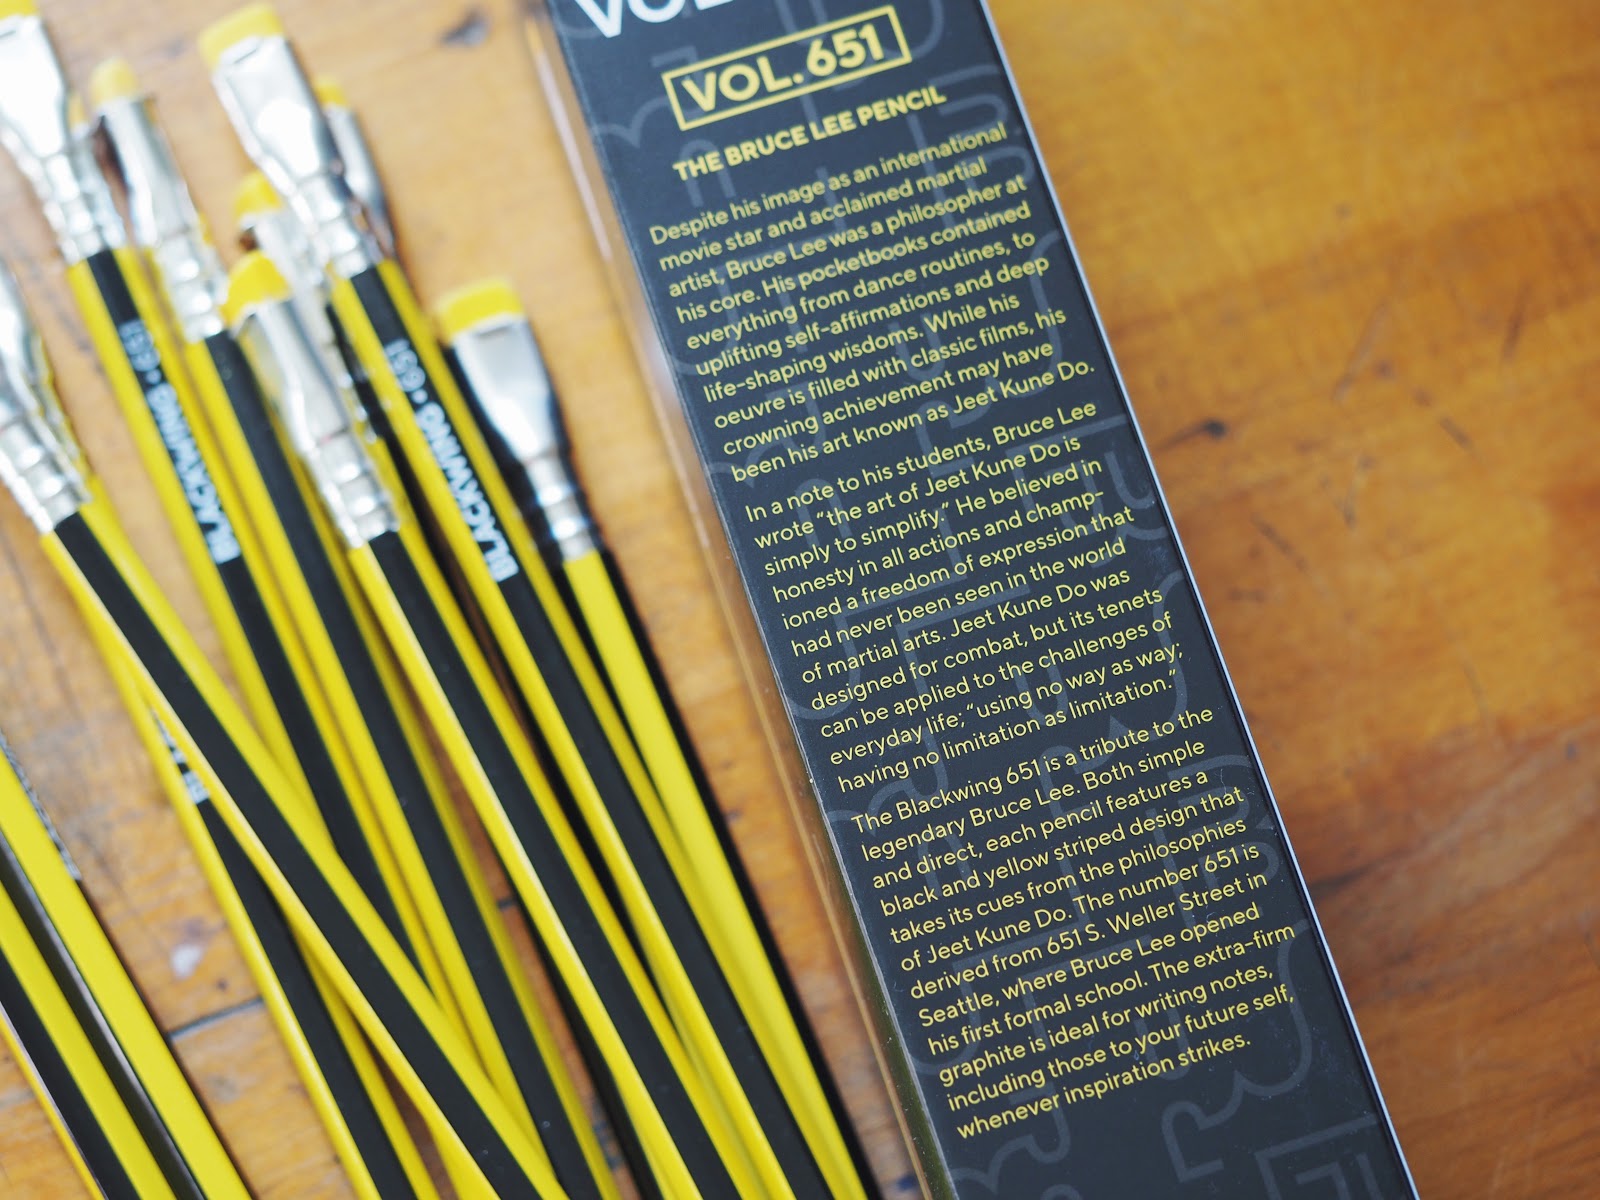 The Comic Book Pencil: Blackwing Volumes No. 64 - The Paper Seahorse